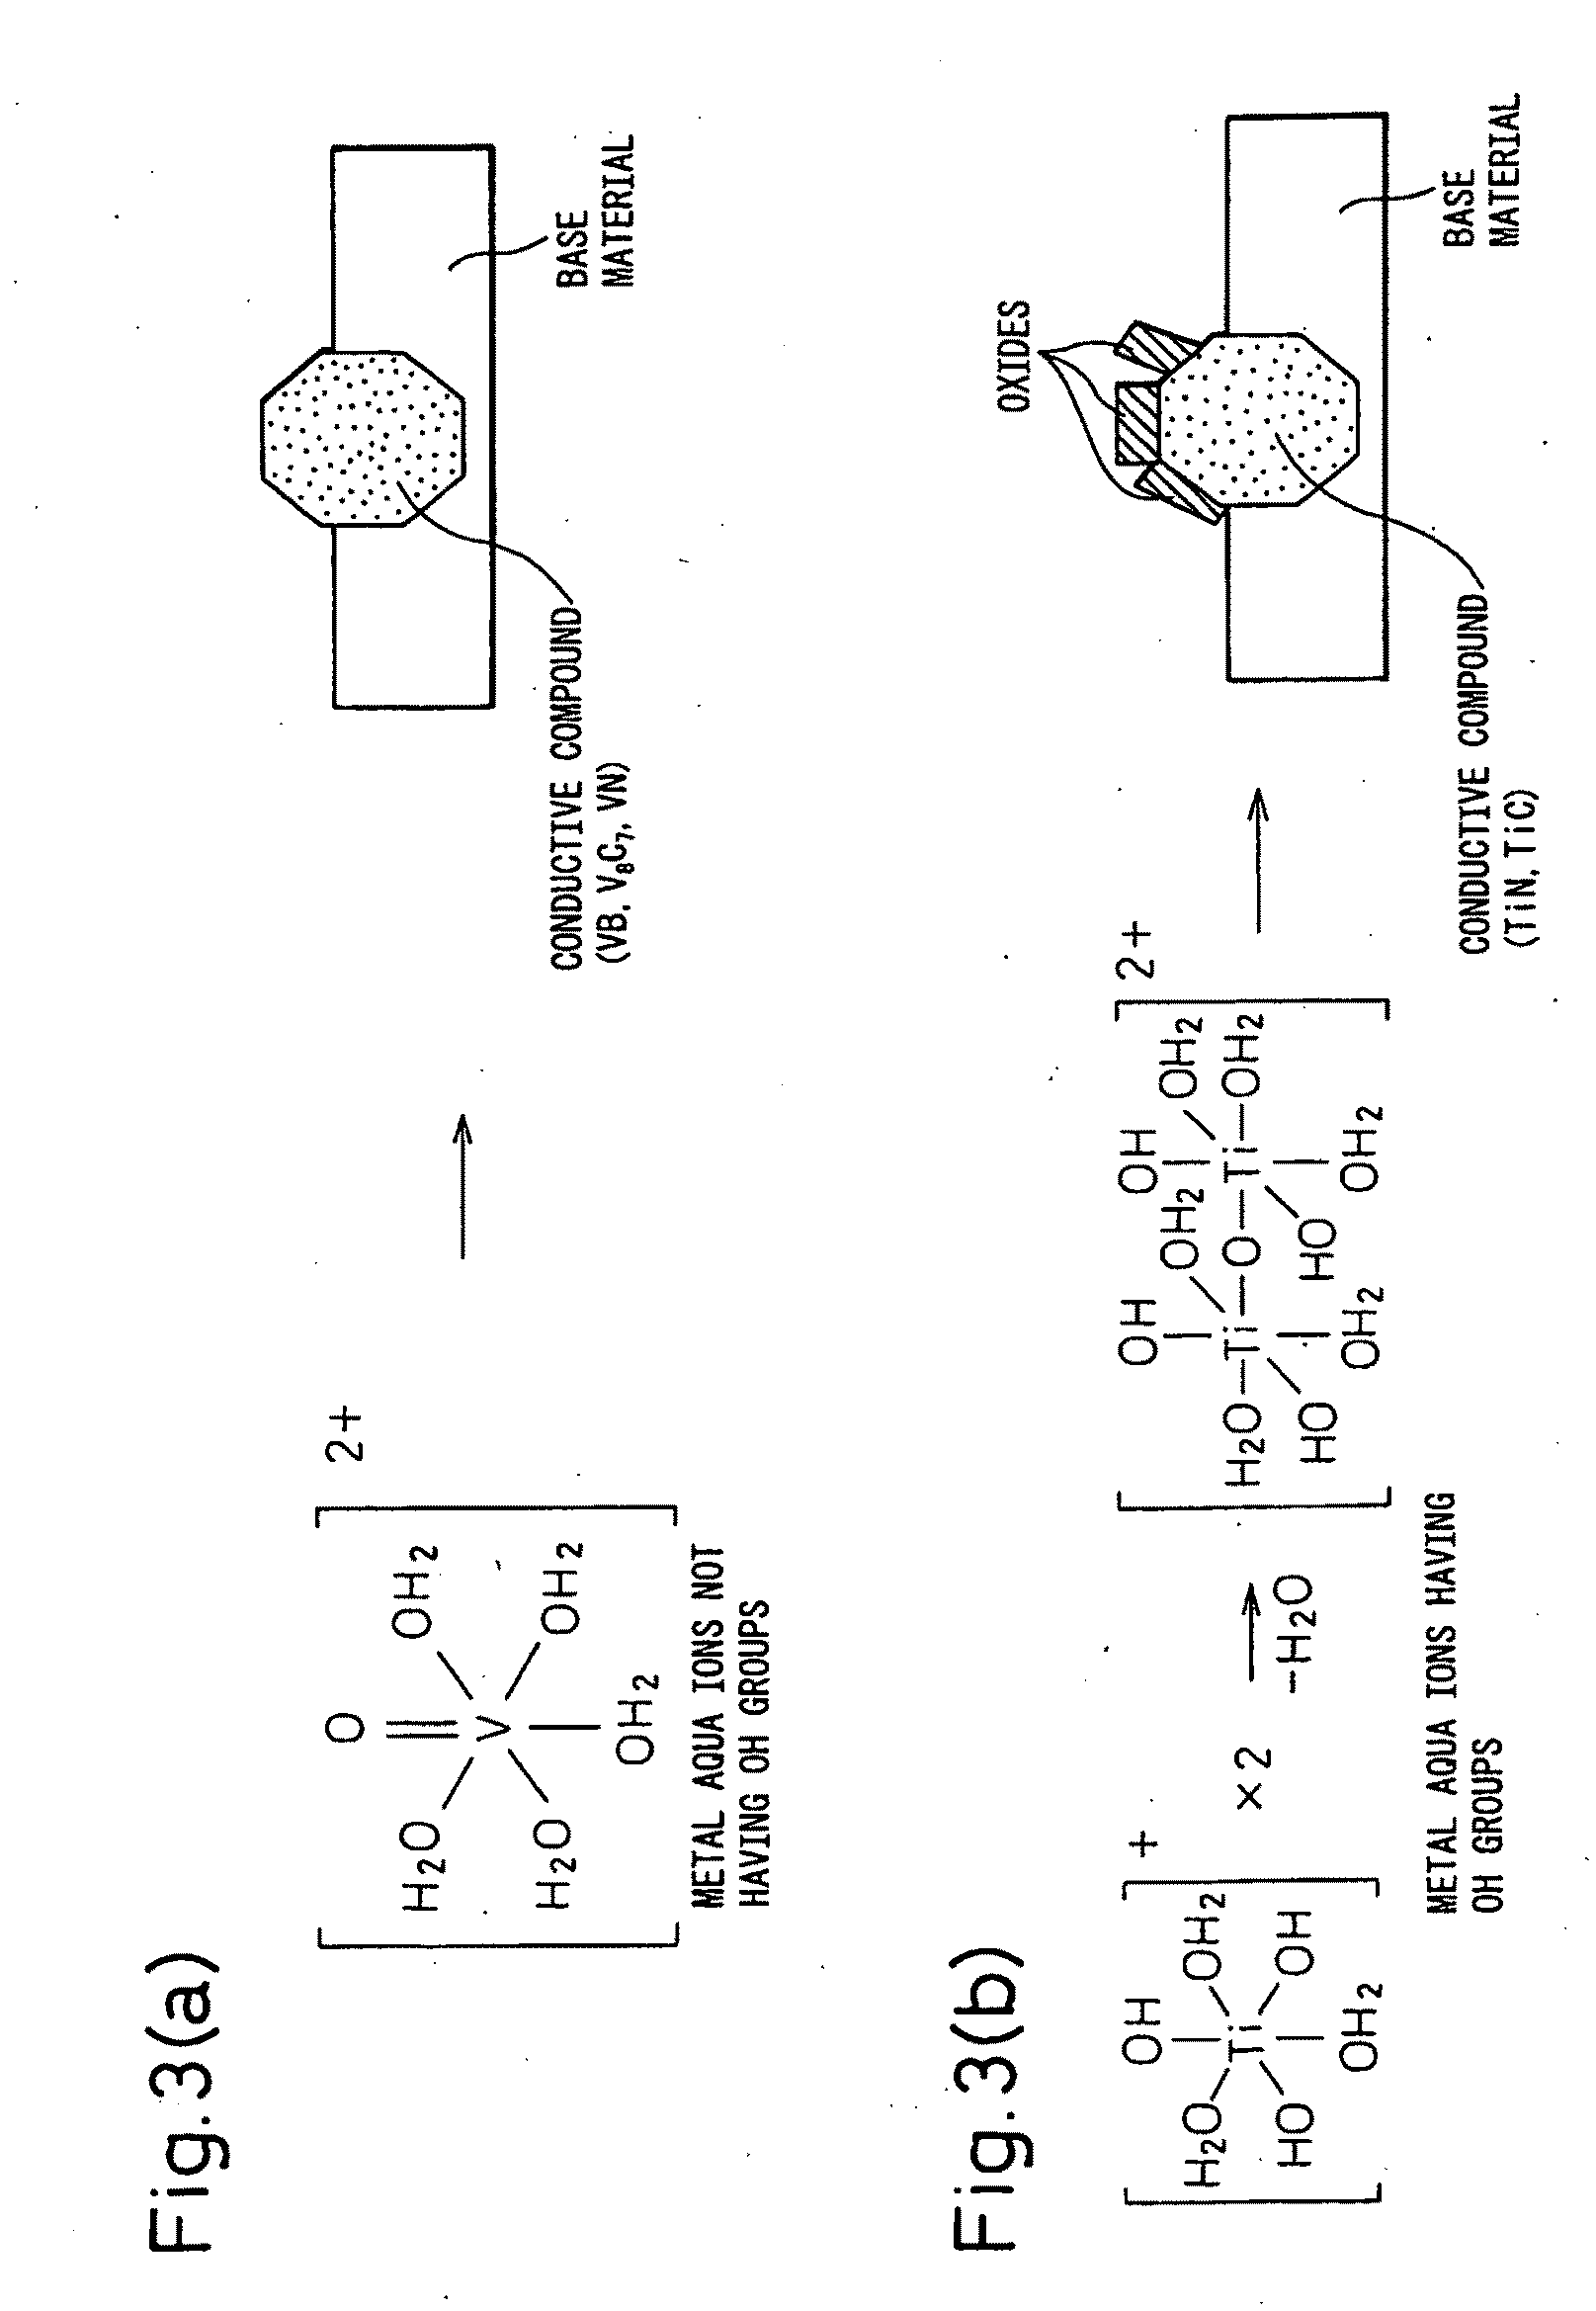 Stainless Steel, Titanium, or Titanium Alloy Solid Polymer Fuel Cell Separator and Its Method of Produciton and Method of Evaluation of Warp and Twist of Separator